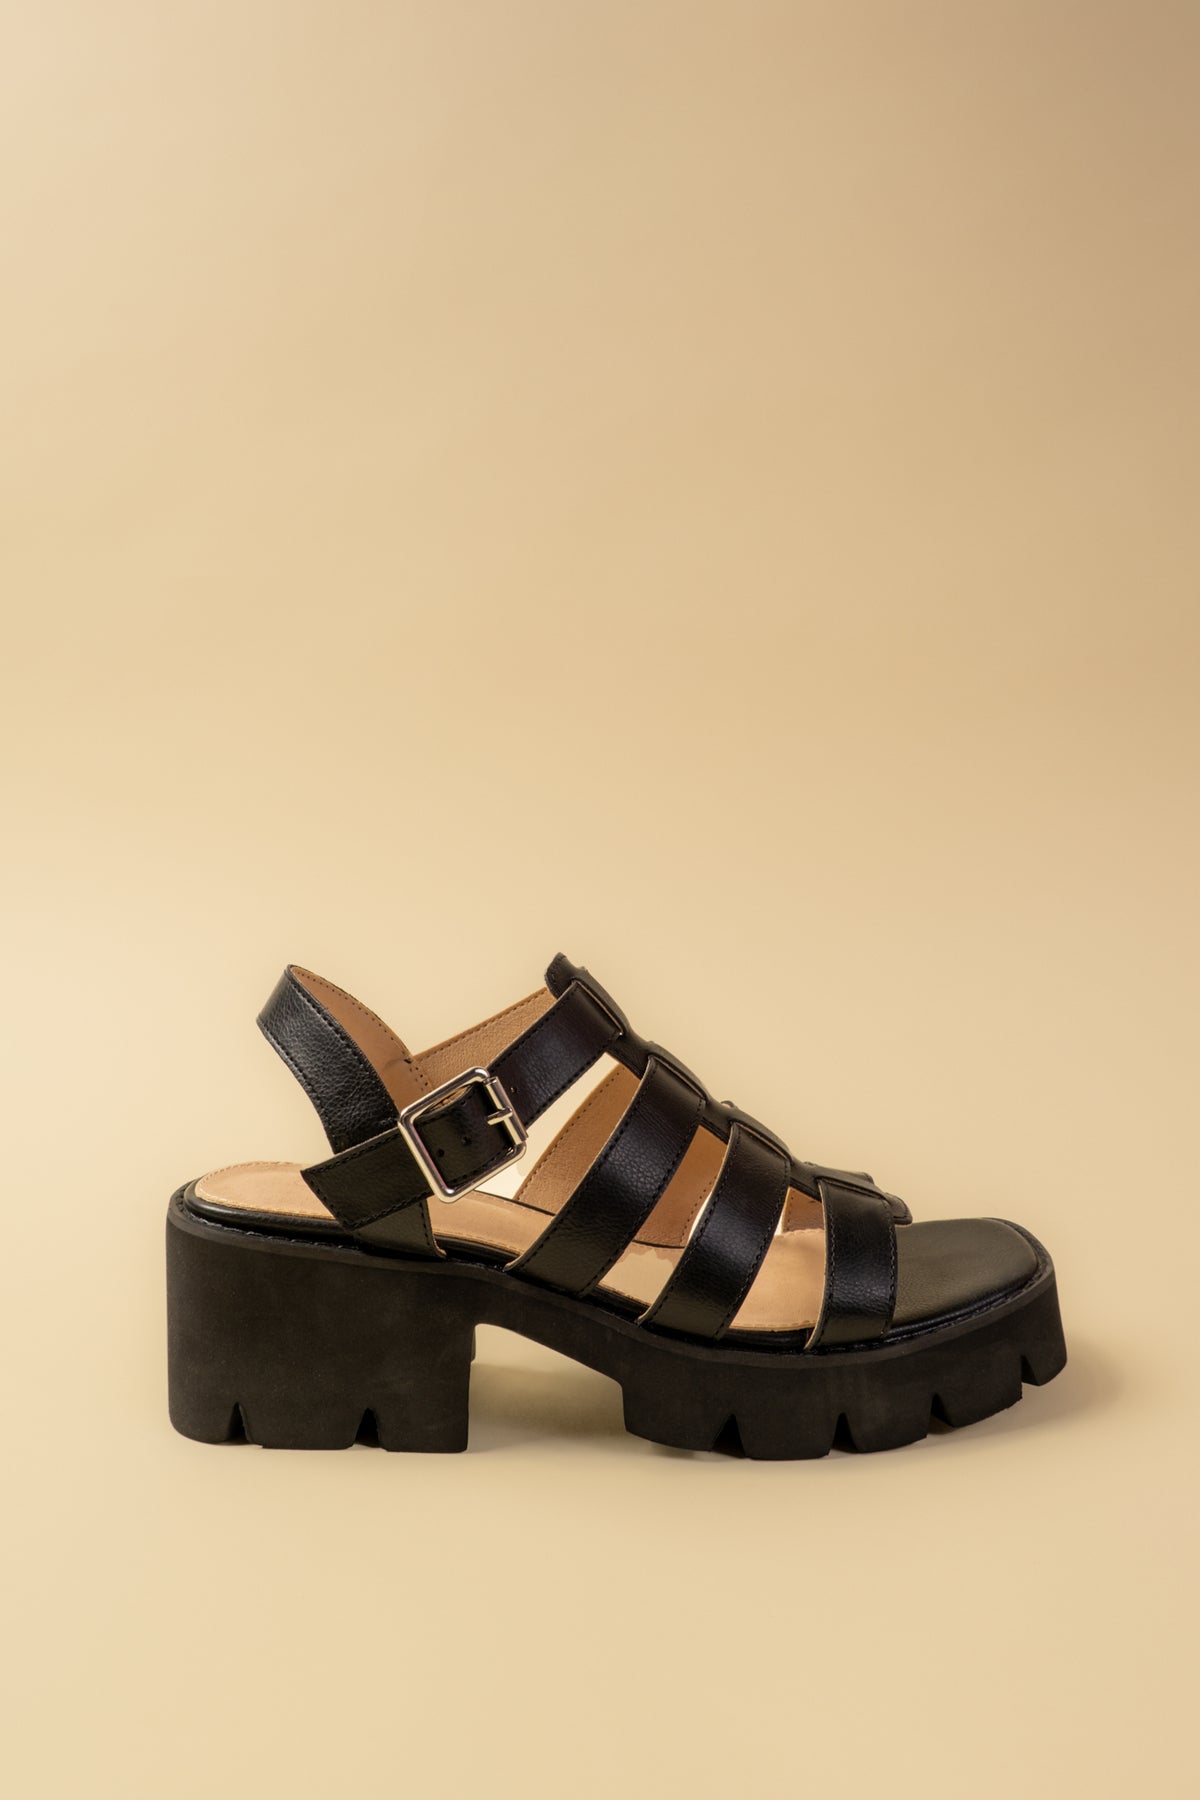 Strapped Lug Sole Sandals